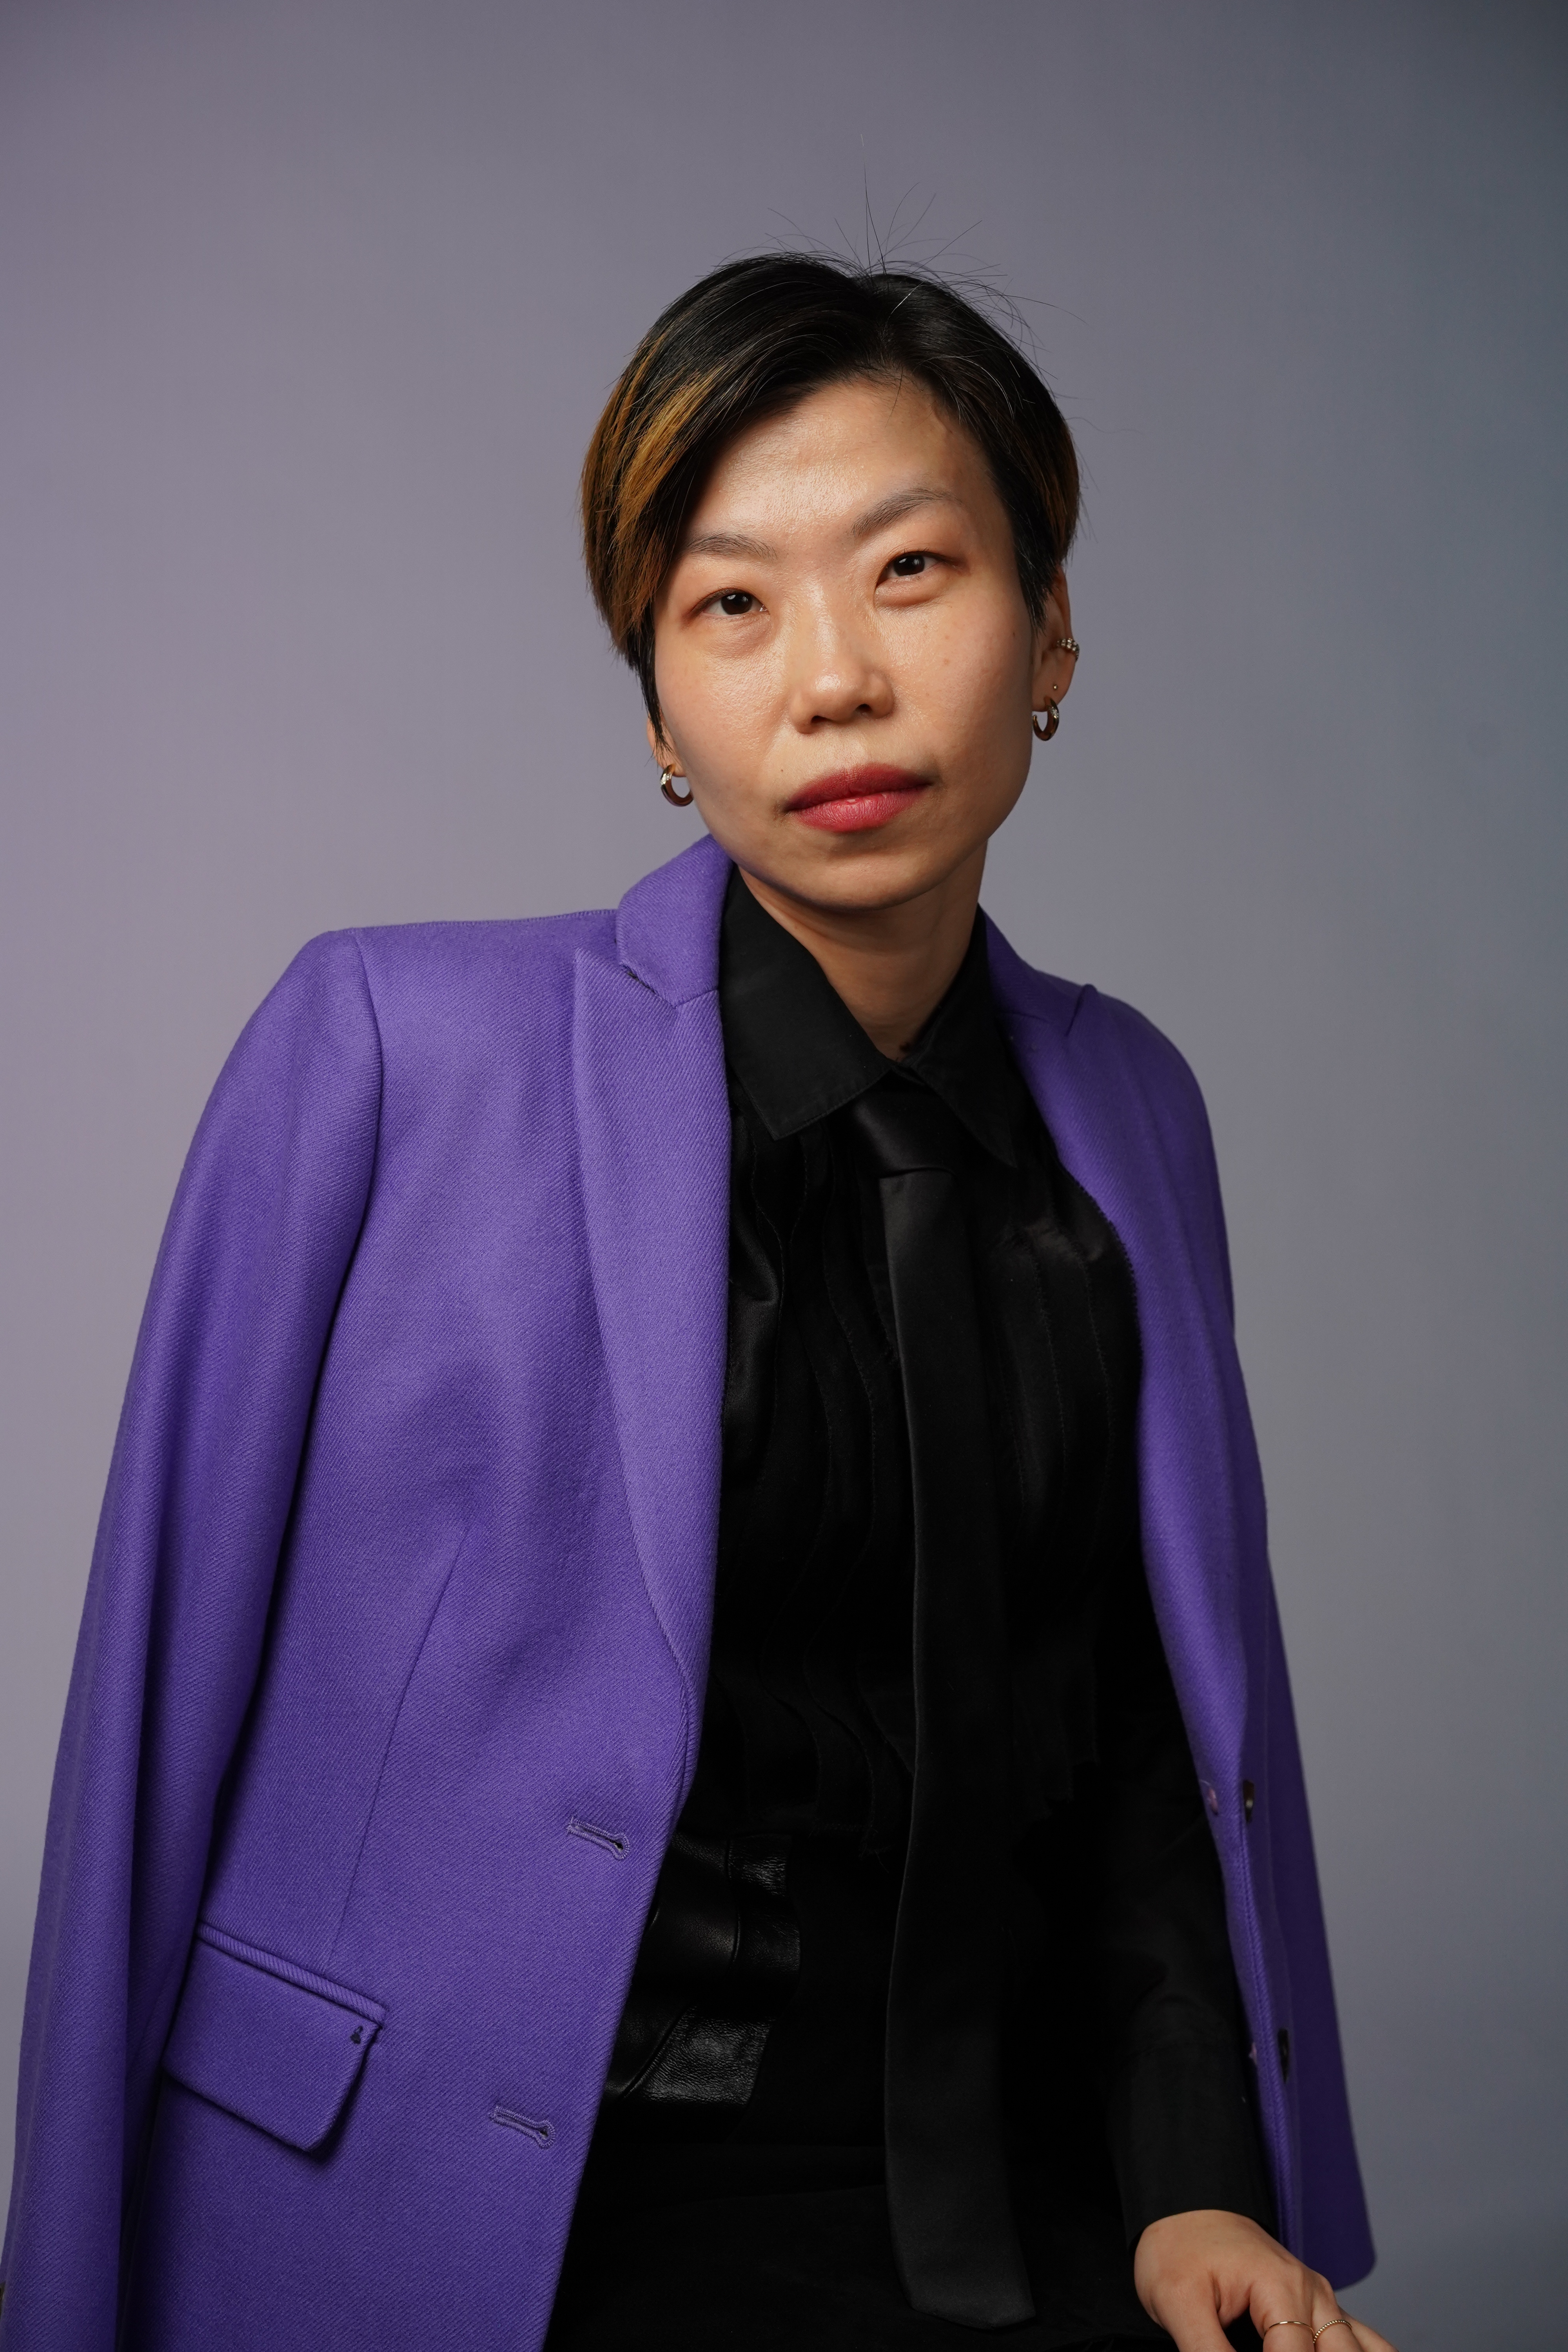 woman with short cropped hair and a purple jacket